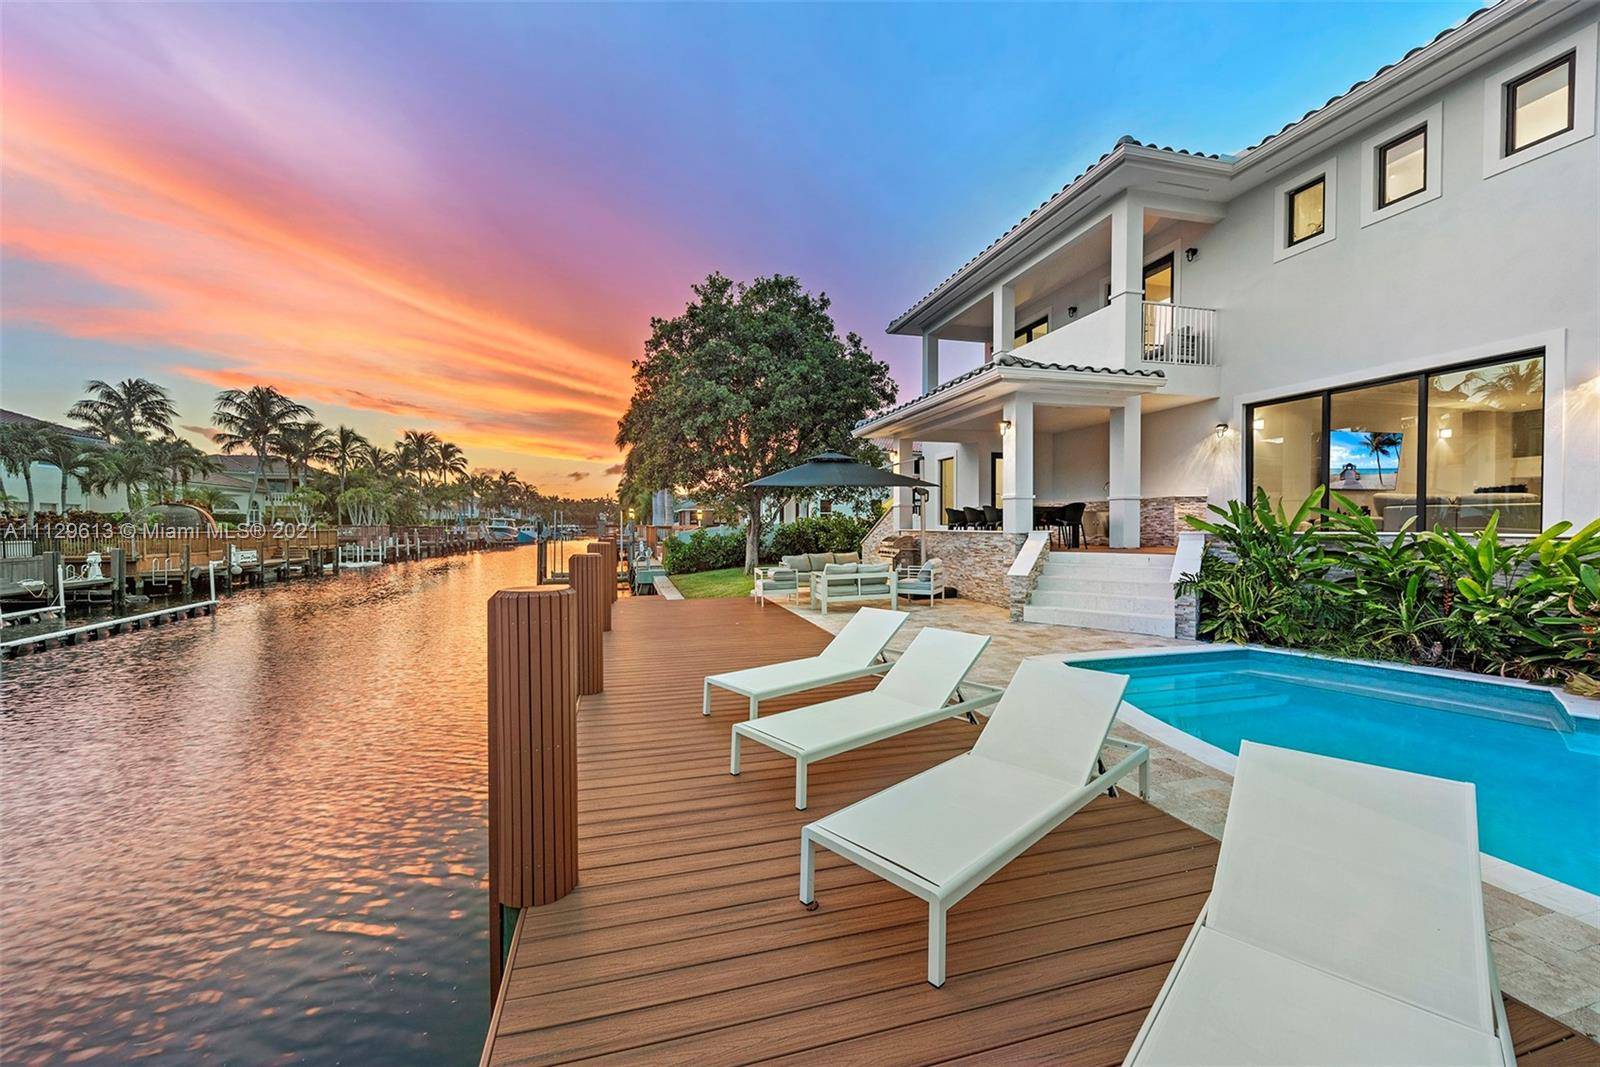 Beautifully designed home located in the exclusive area of South Lake in Hollywood Beach on a 100 waterfront lot with direct ocean access seconds away from the Intracoastal.